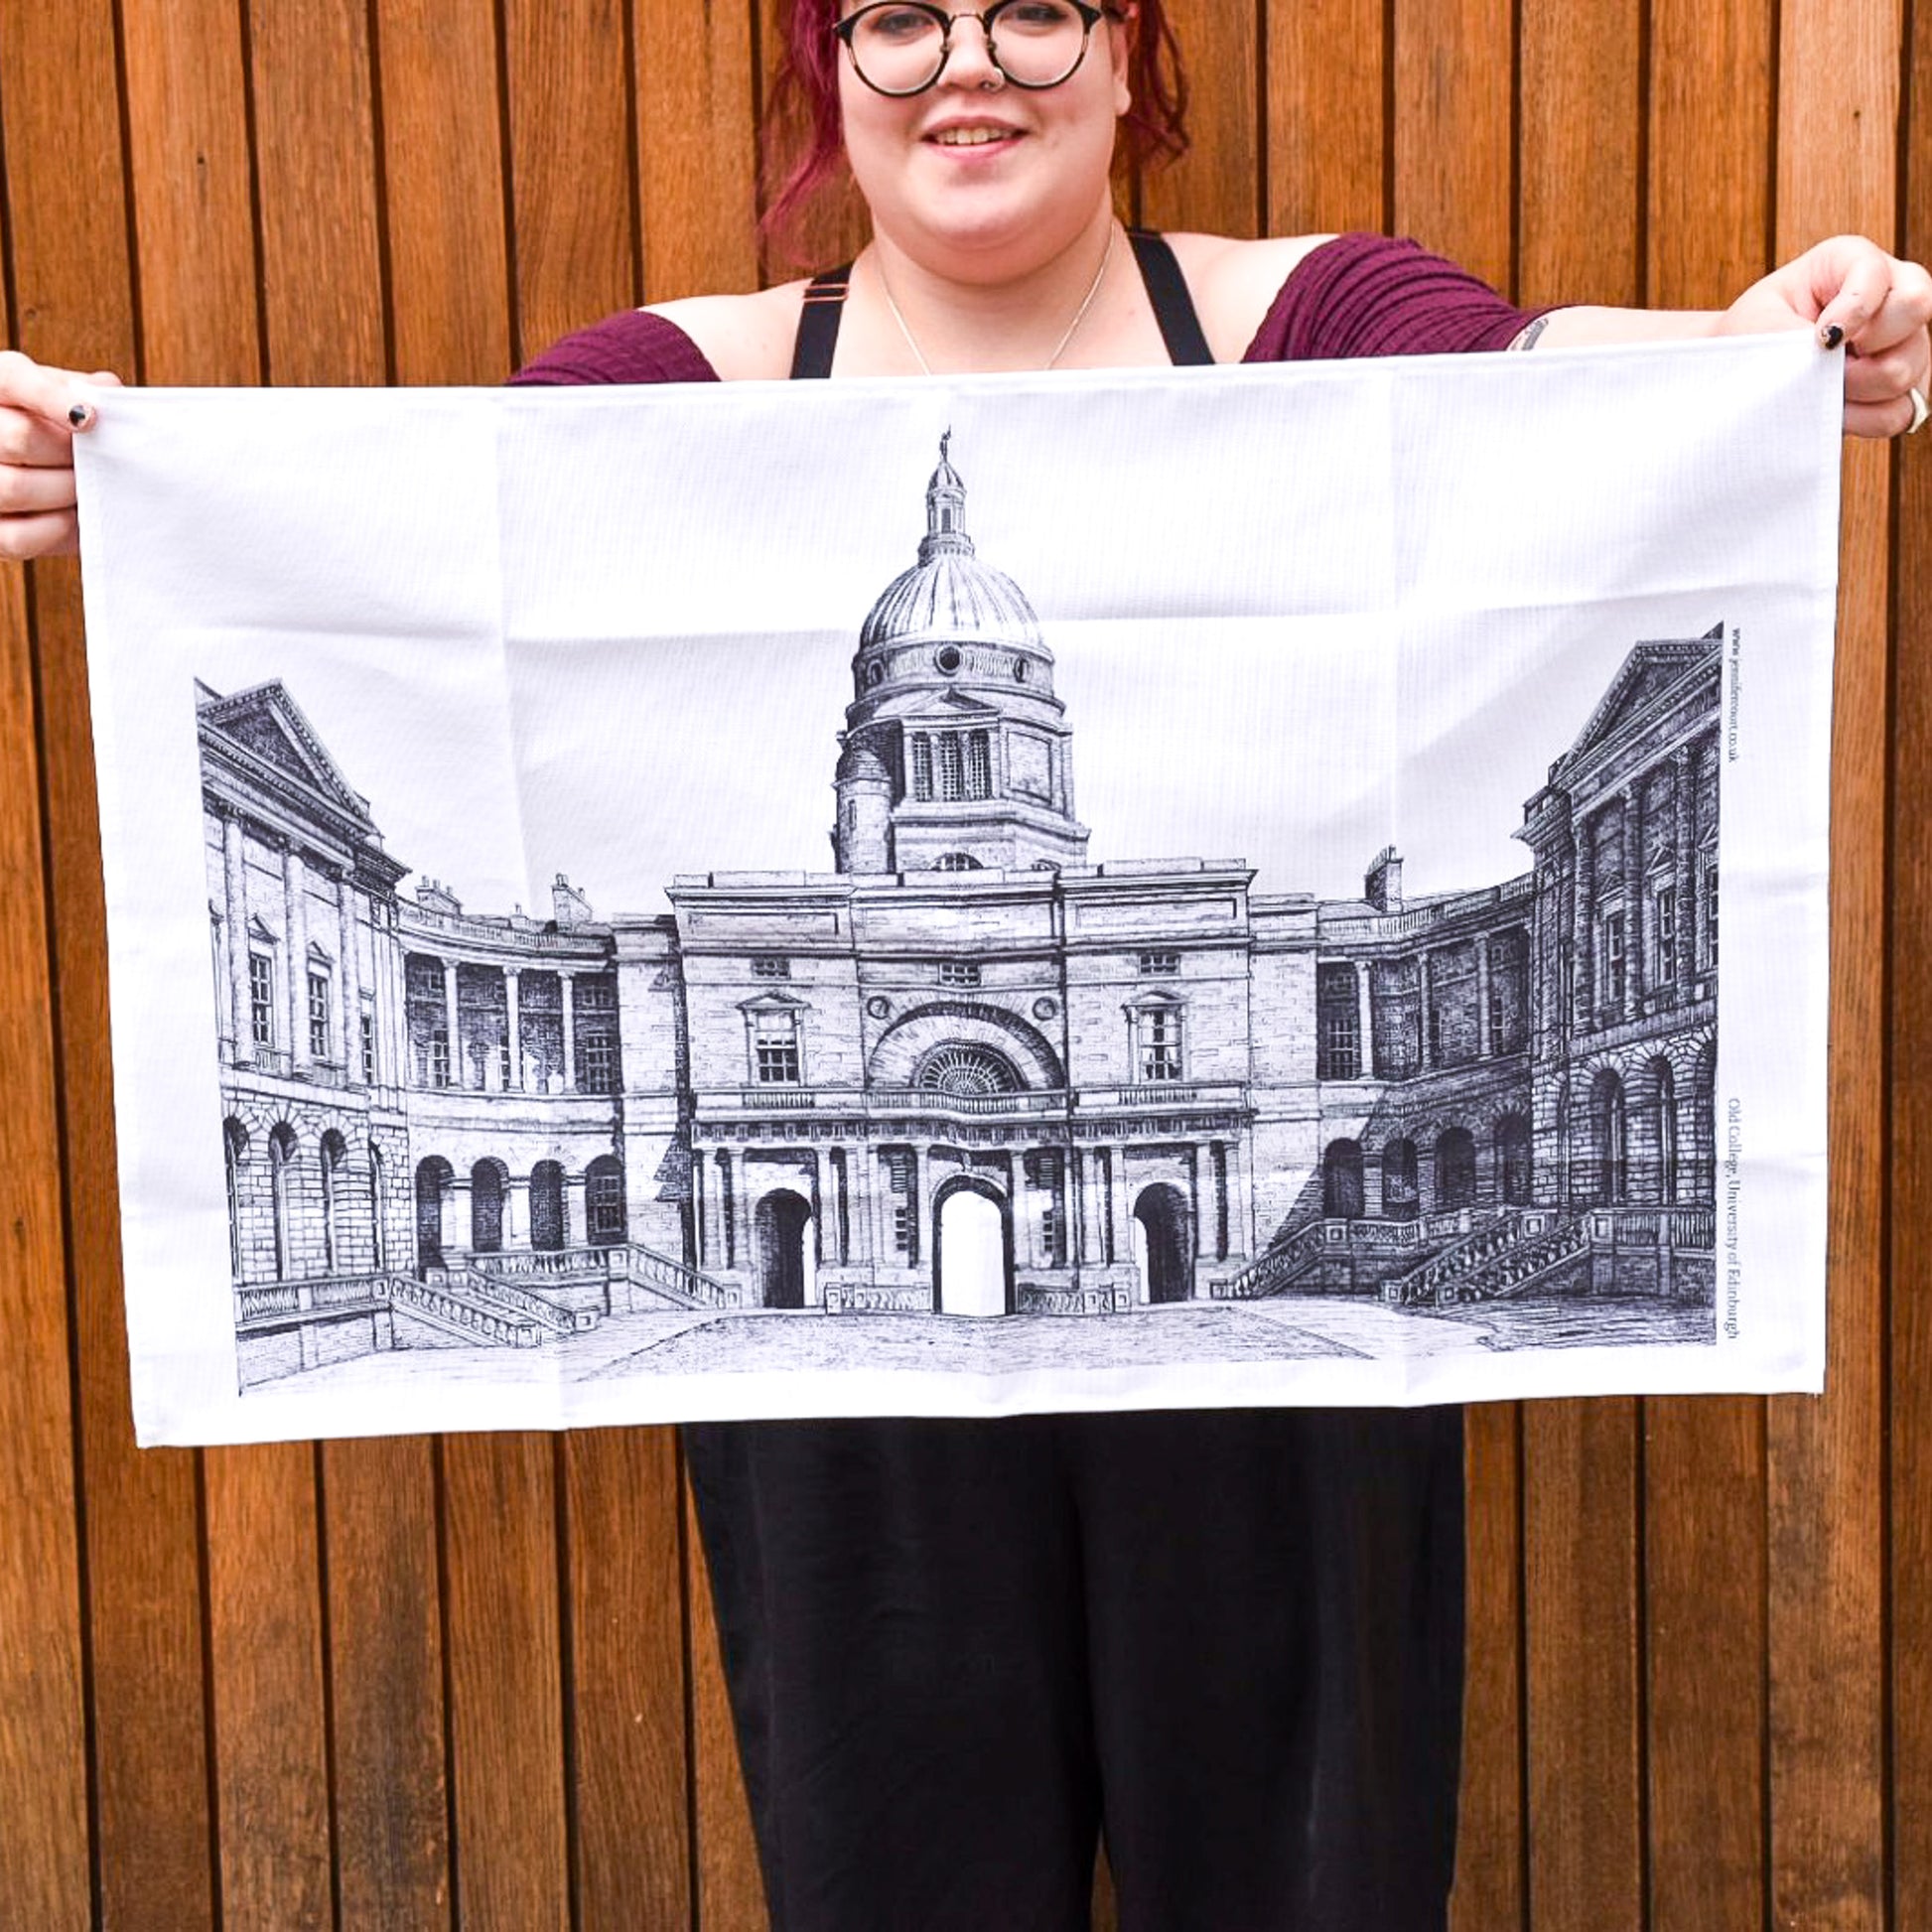 Black and white image of Old College on a white tea towel held by a model